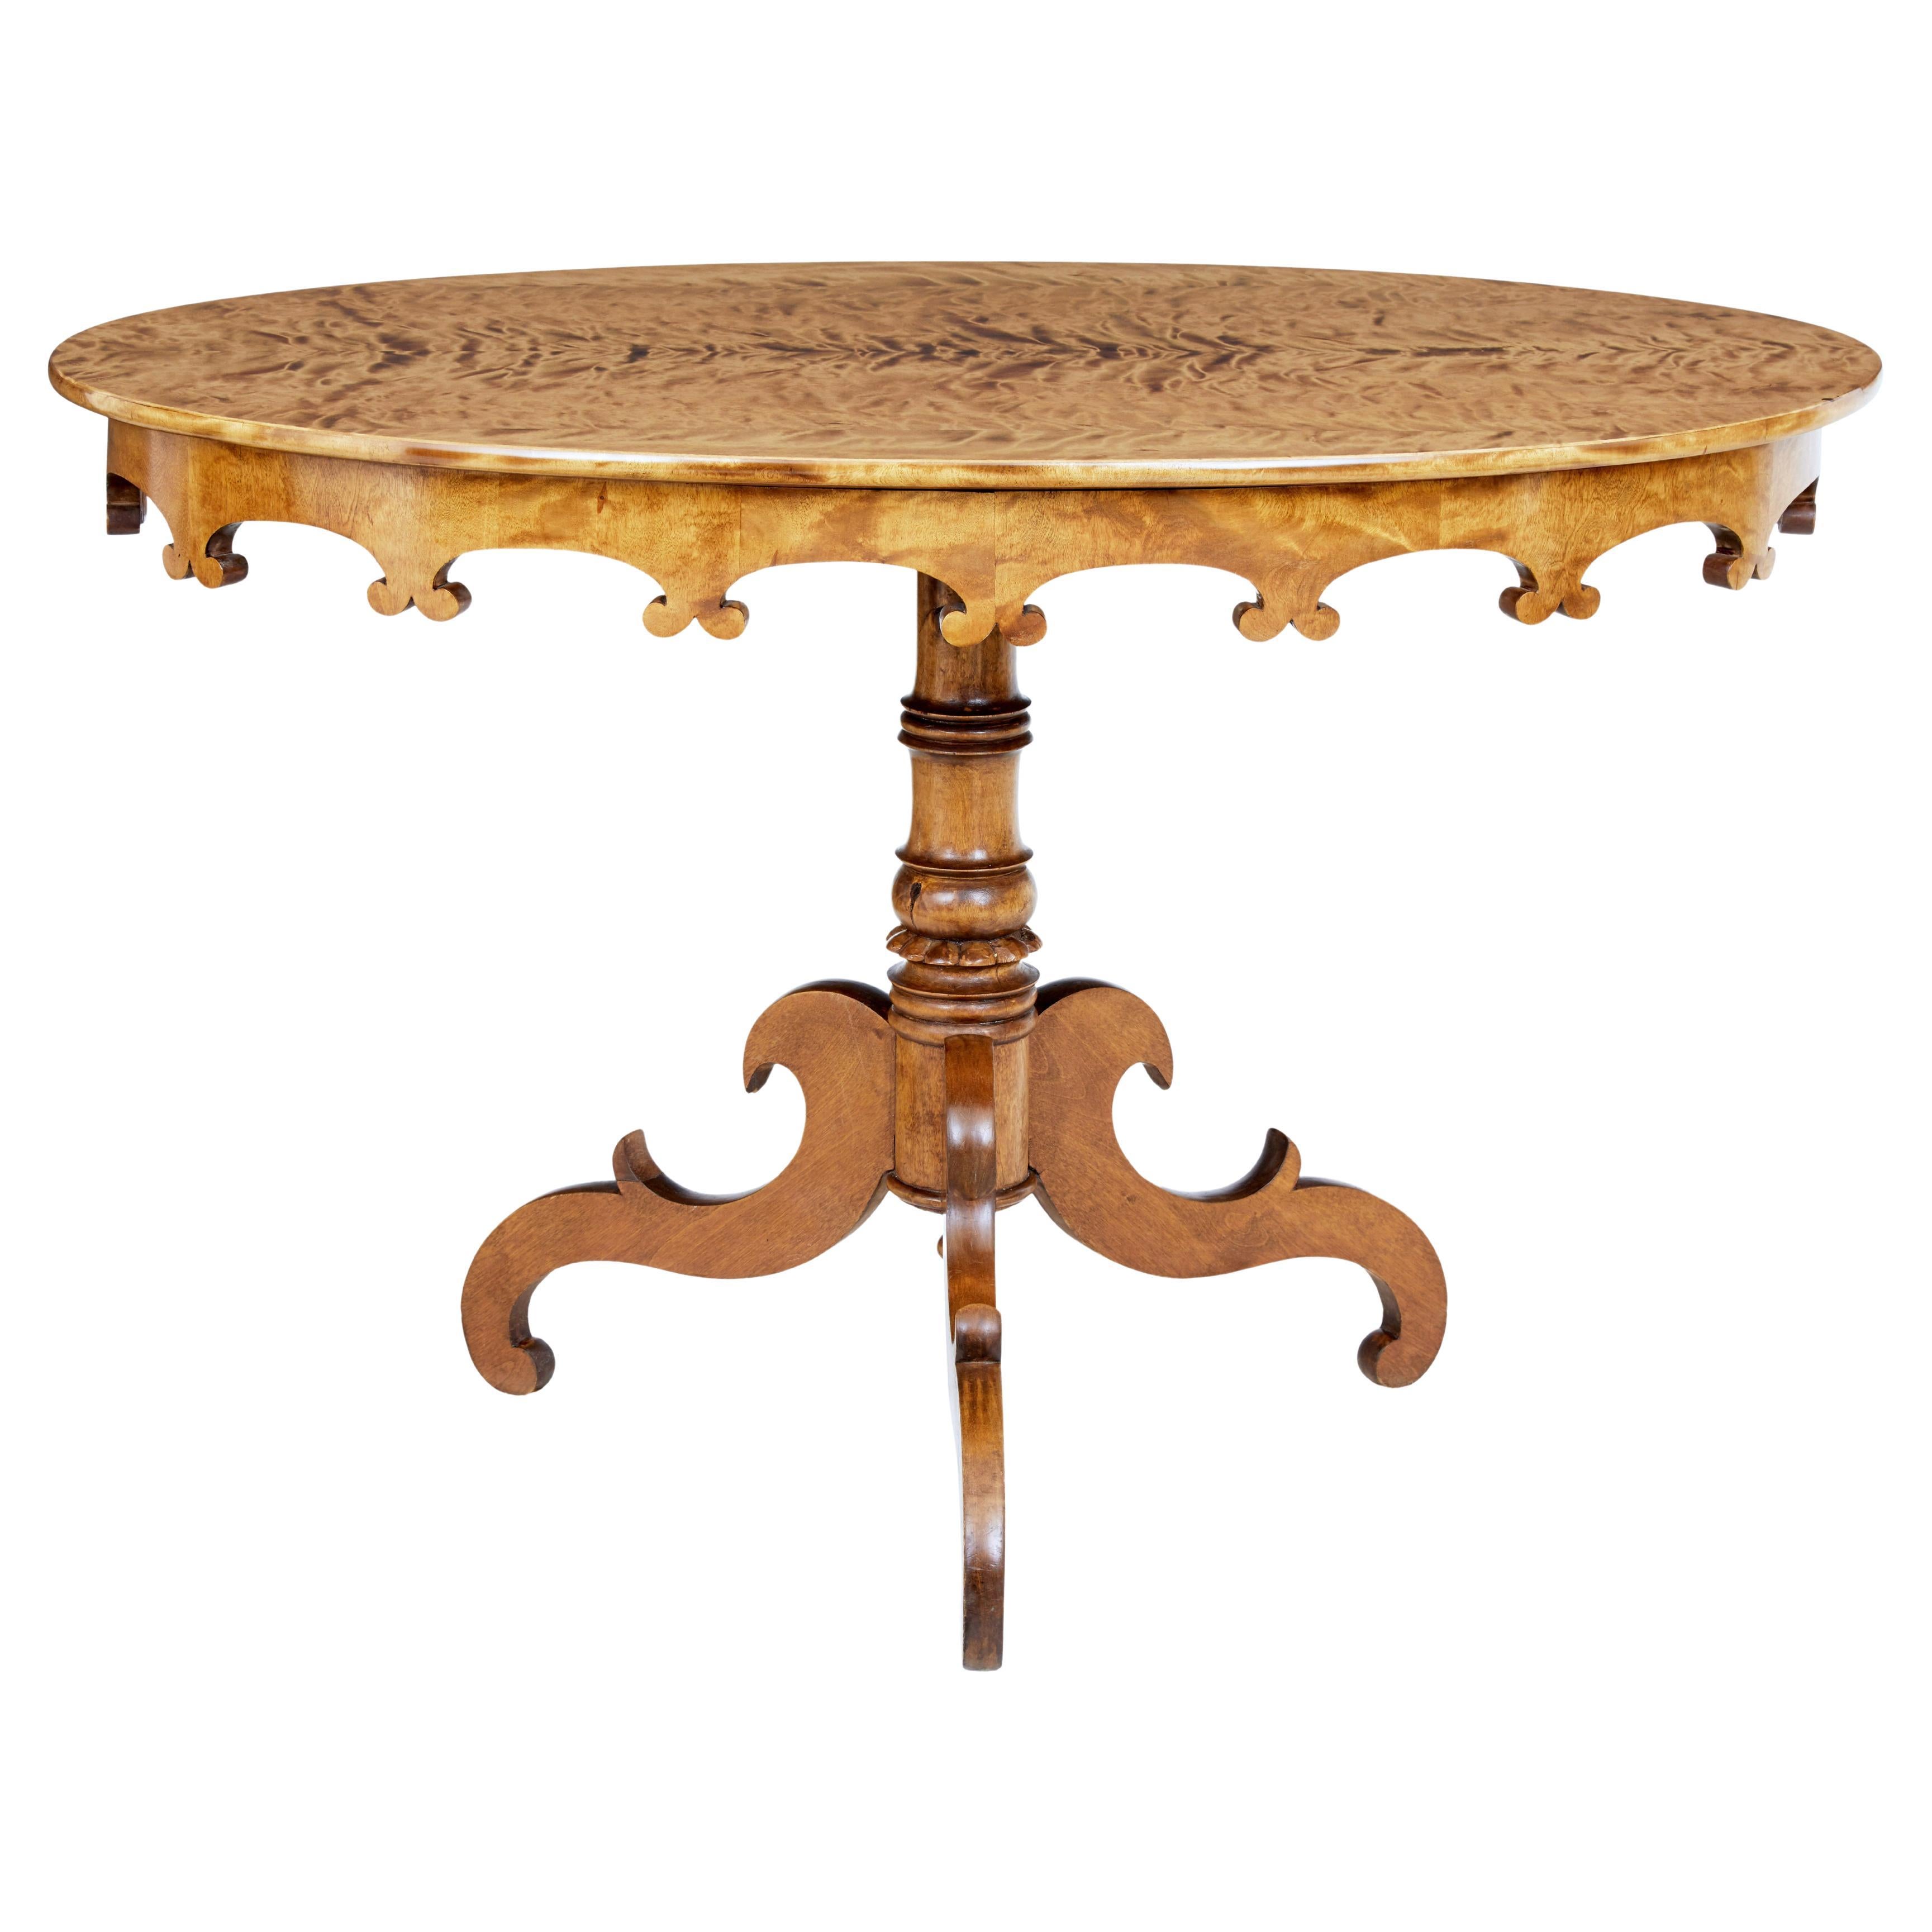 Swedish 1890s Burr Birch Occasional Table with Oval Top and Carved Apron